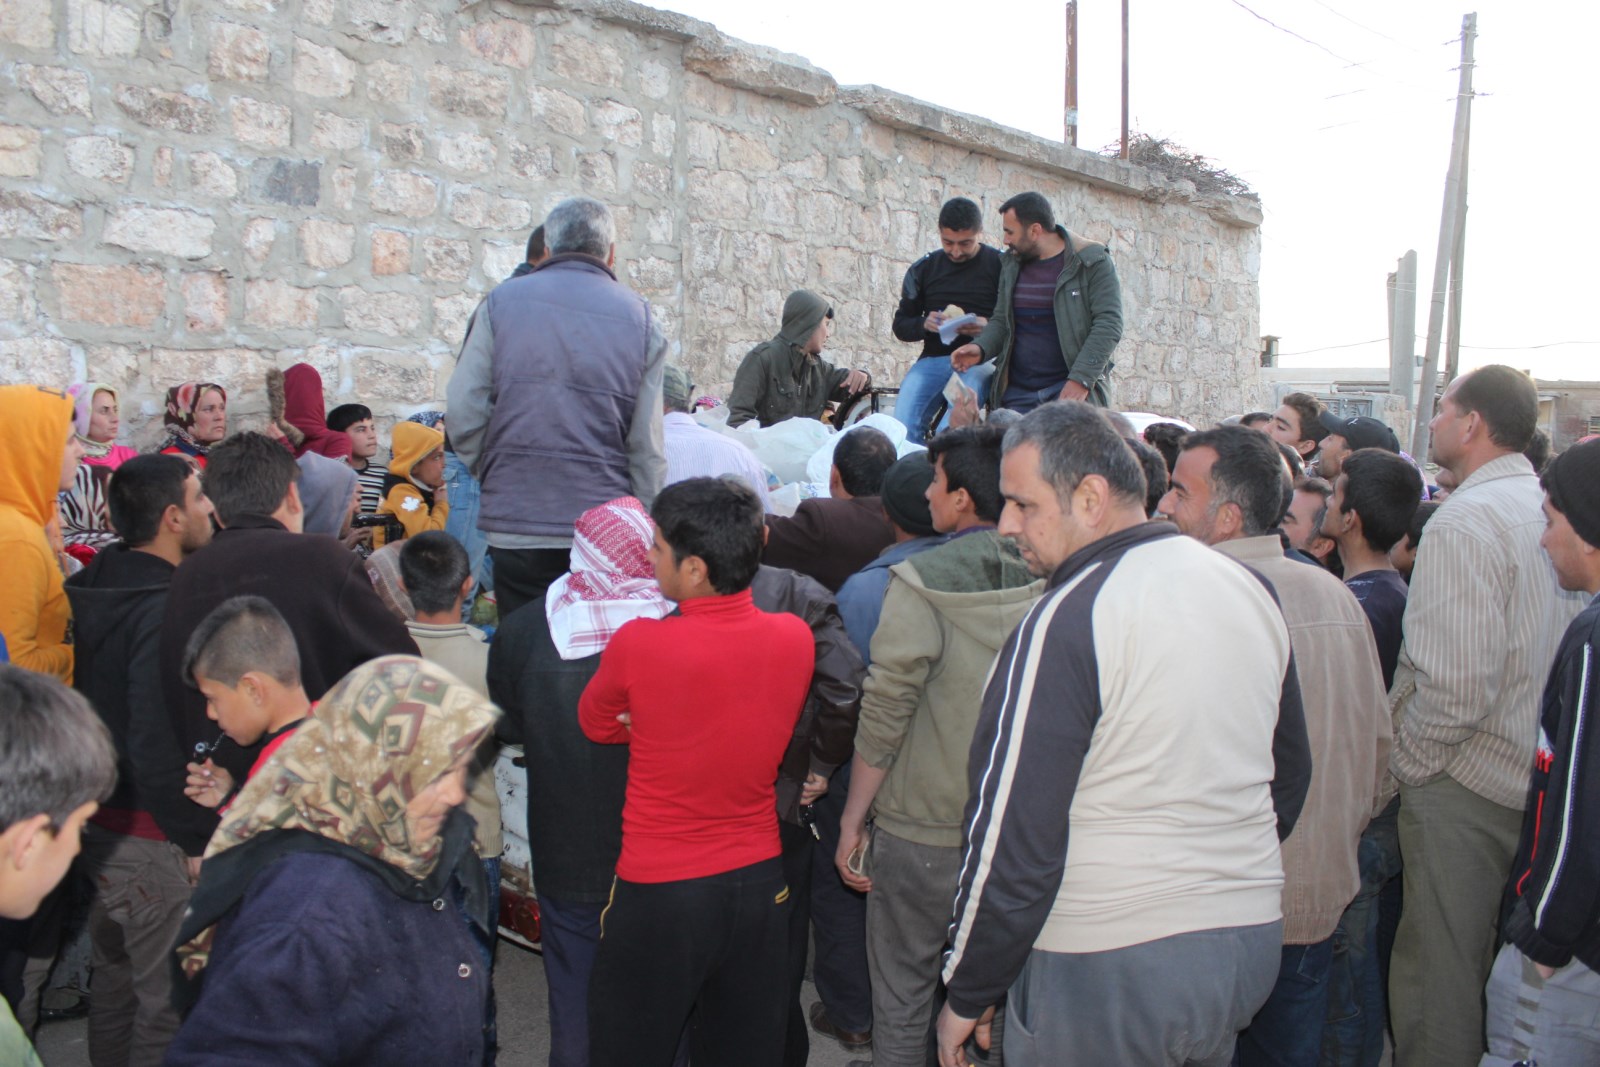 Al-Shahba Administration continues to provide aid to Afrin residents